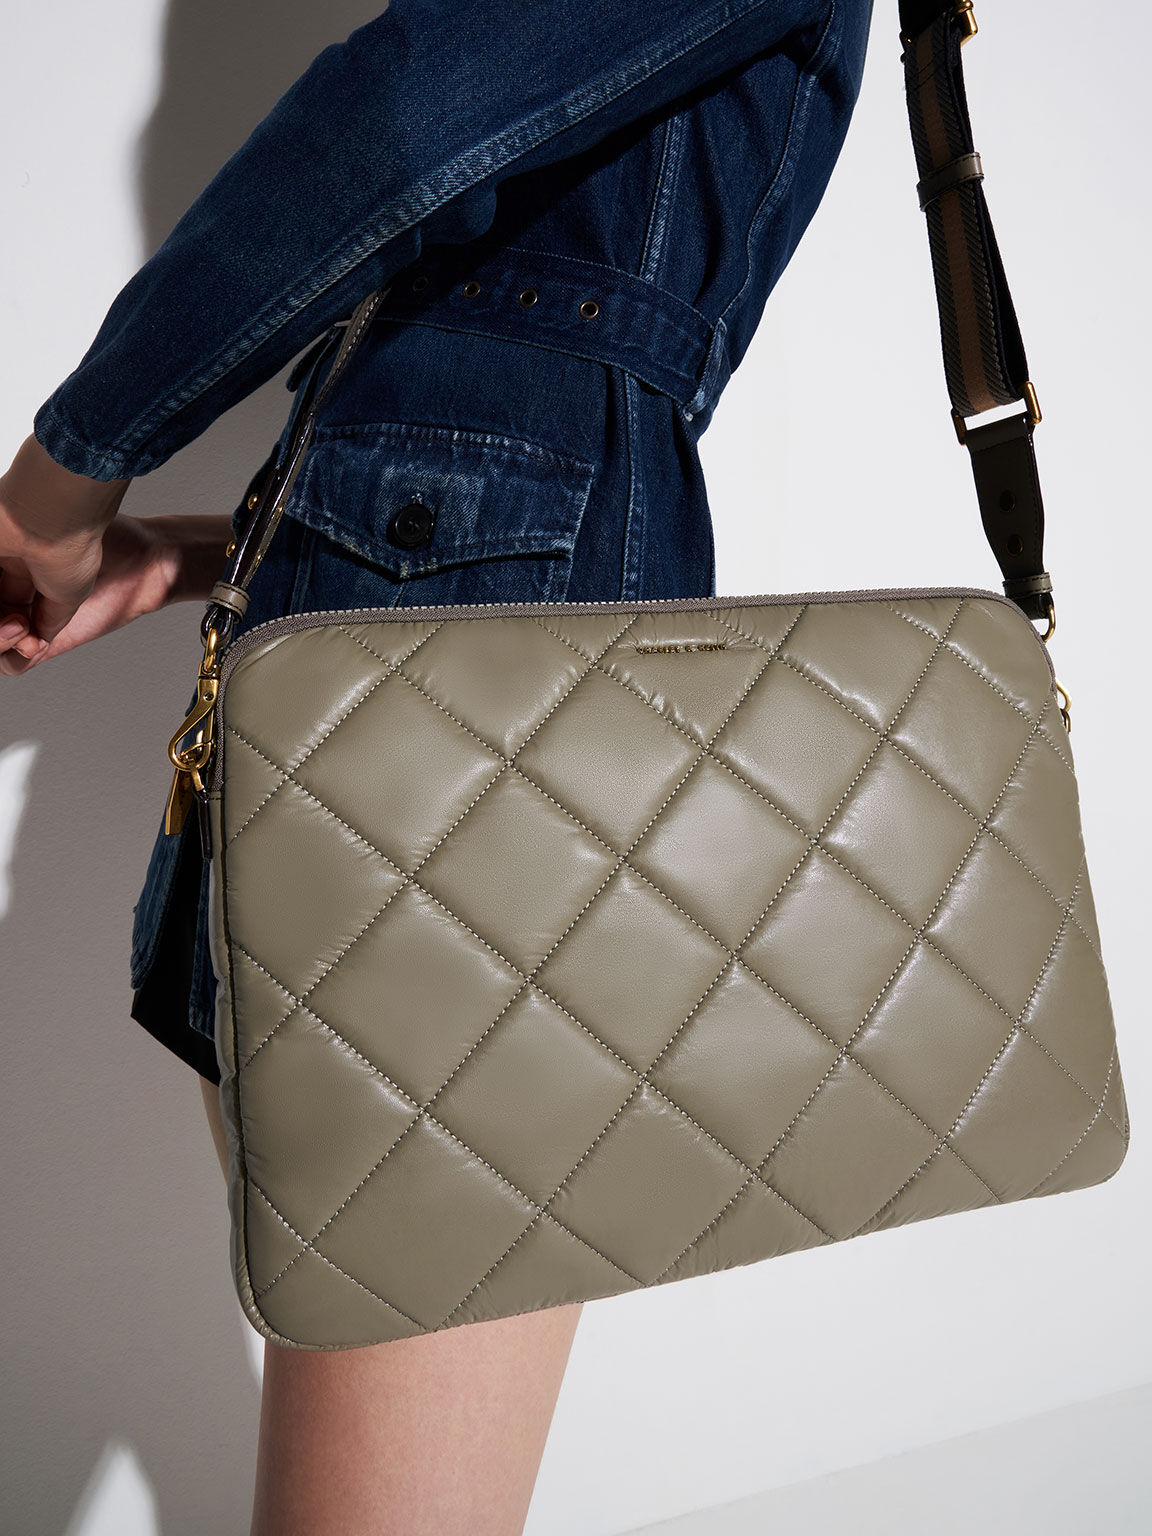 Quilted Laptop Bag, Taupe, hi-res